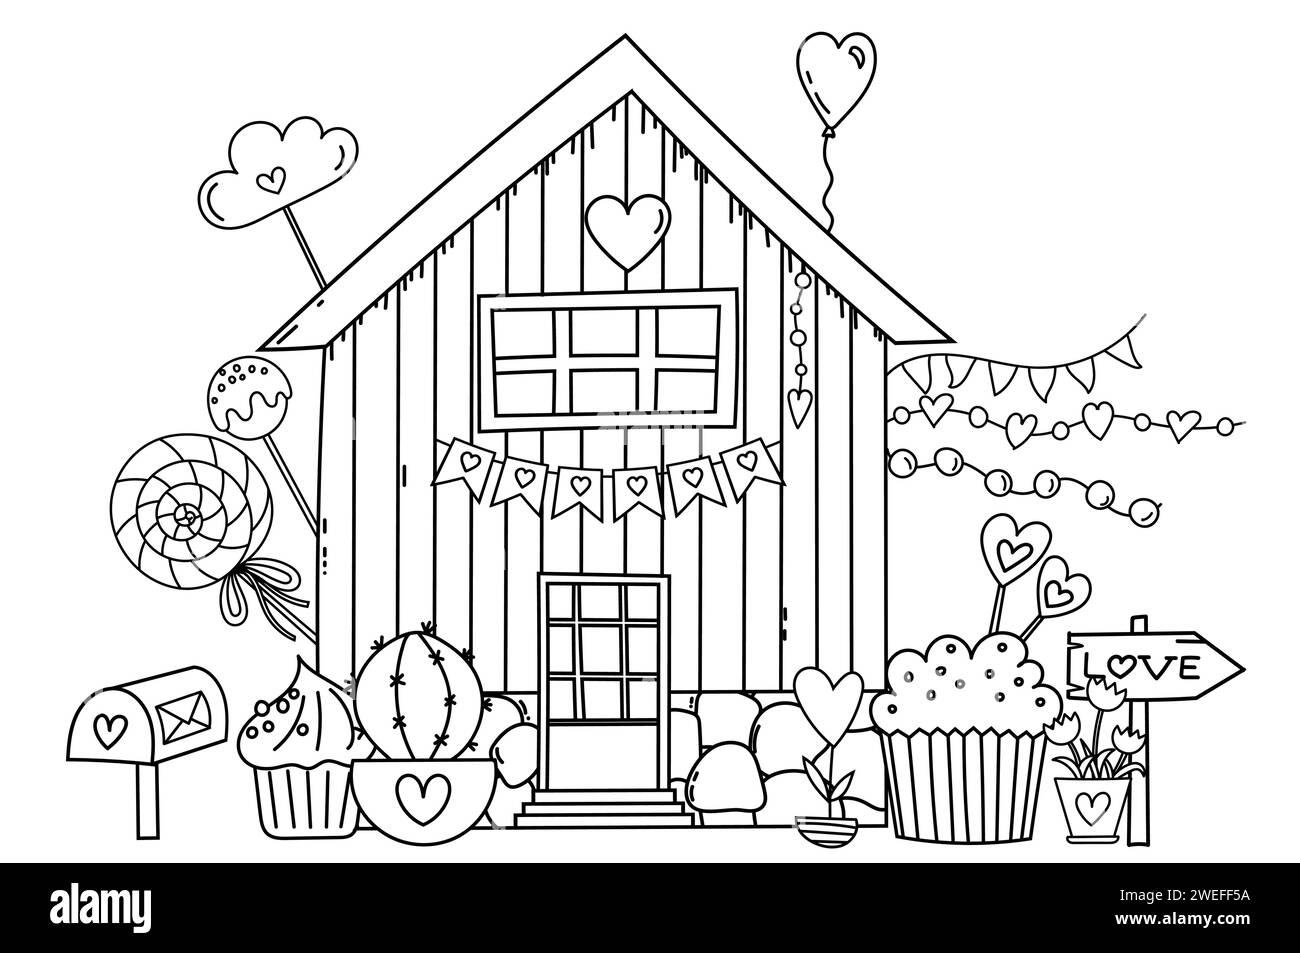 Sweet Home Coloring Page - A Charming Illustration Of A House Filled With Sweets And Flowers, A Fairy-Tale House Coloring Book For Children Stock Vector